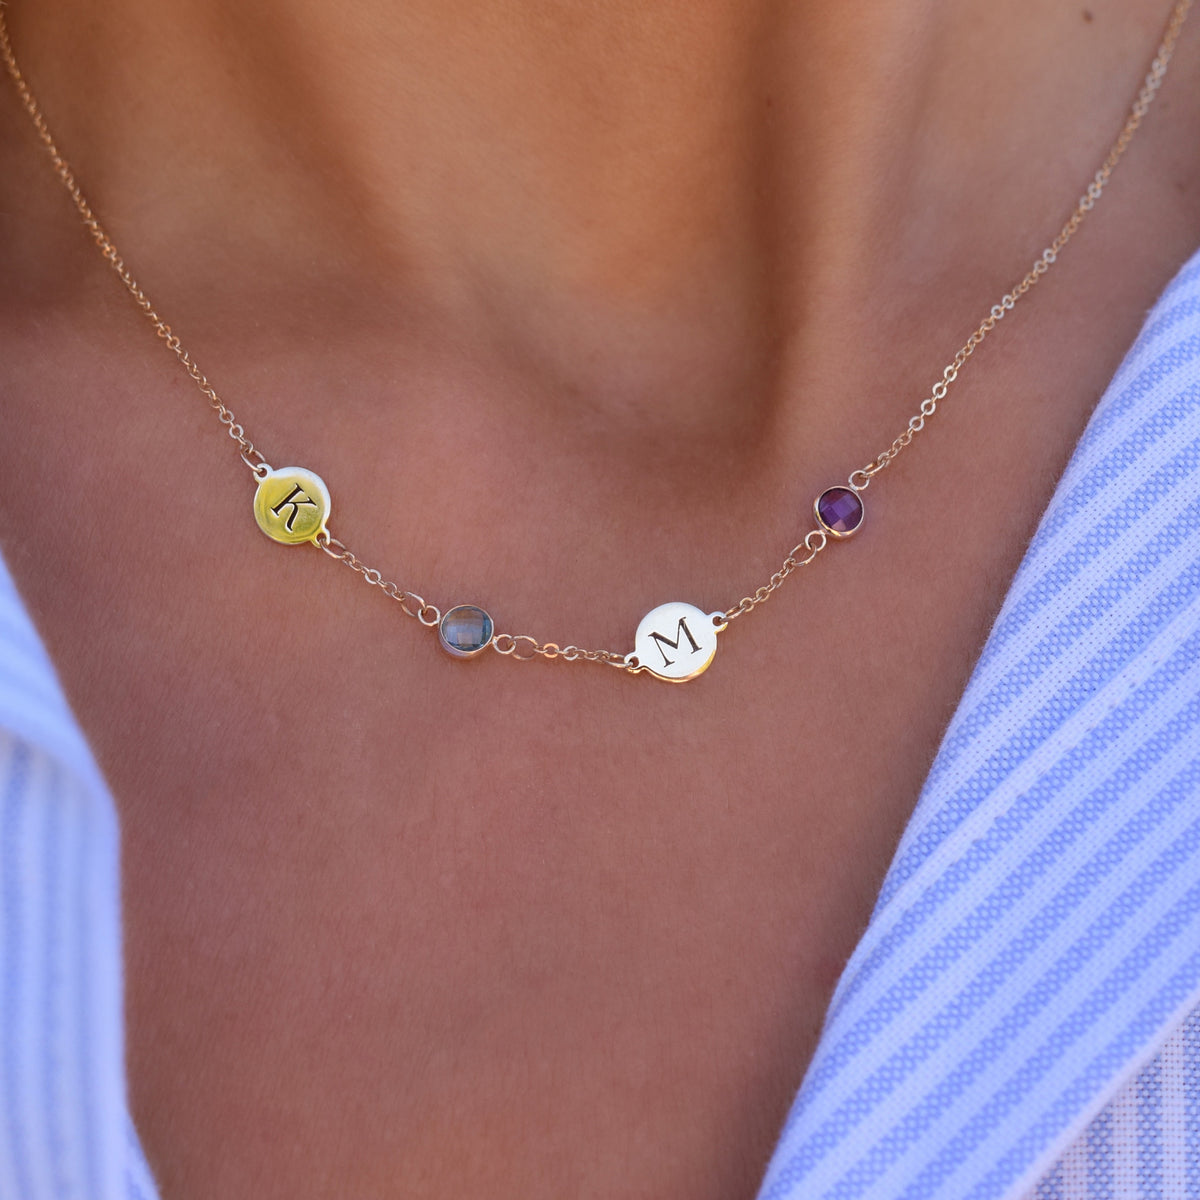 Personalized Initial & Birthstone Necklace